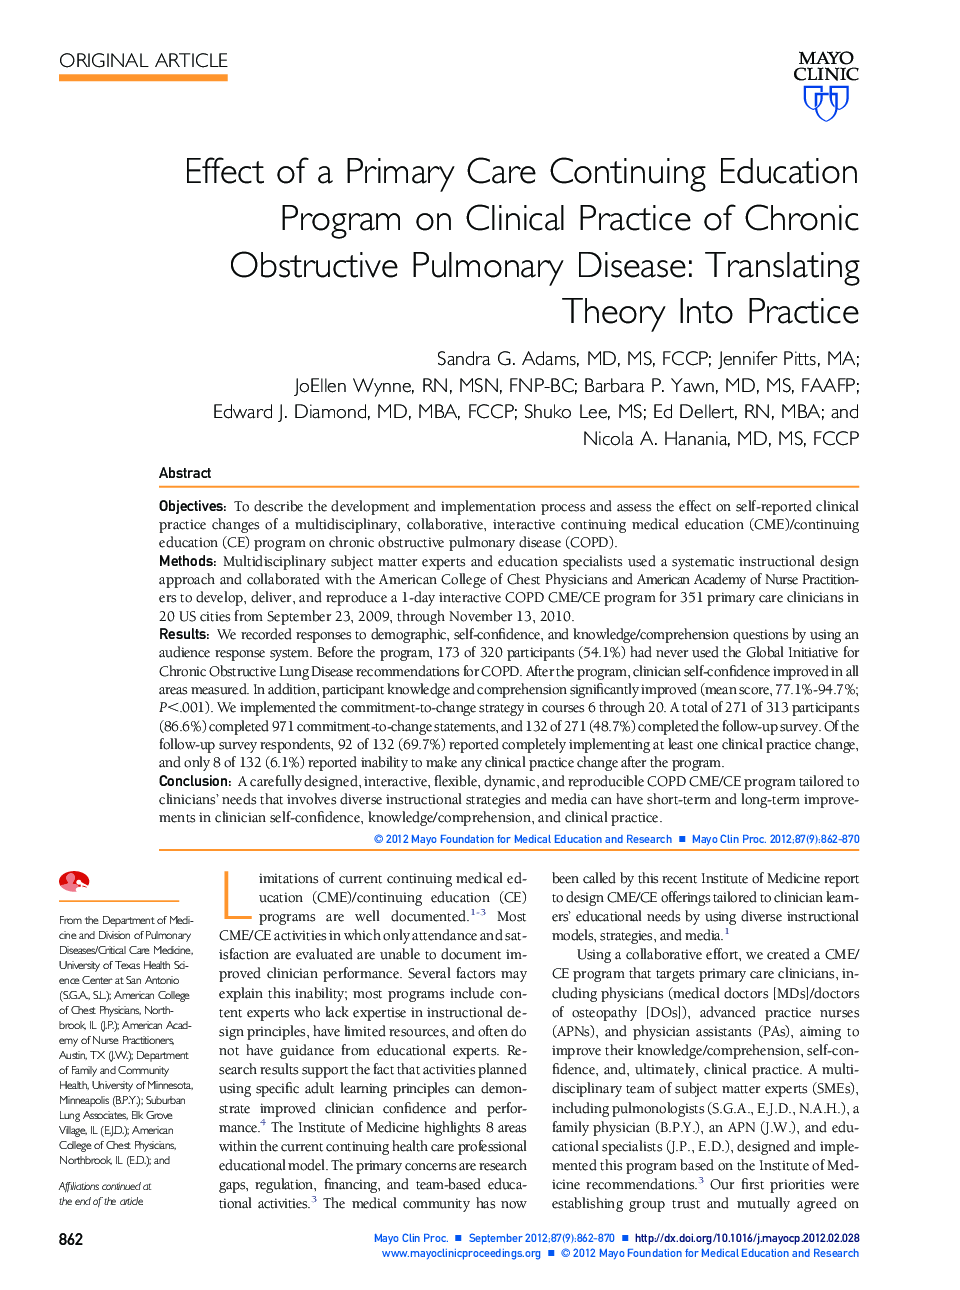 Effect of a Primary Care Continuing Education Program on Clinical Practice of Chronic Obstructive Pulmonary Disease: Translating Theory Into Practice